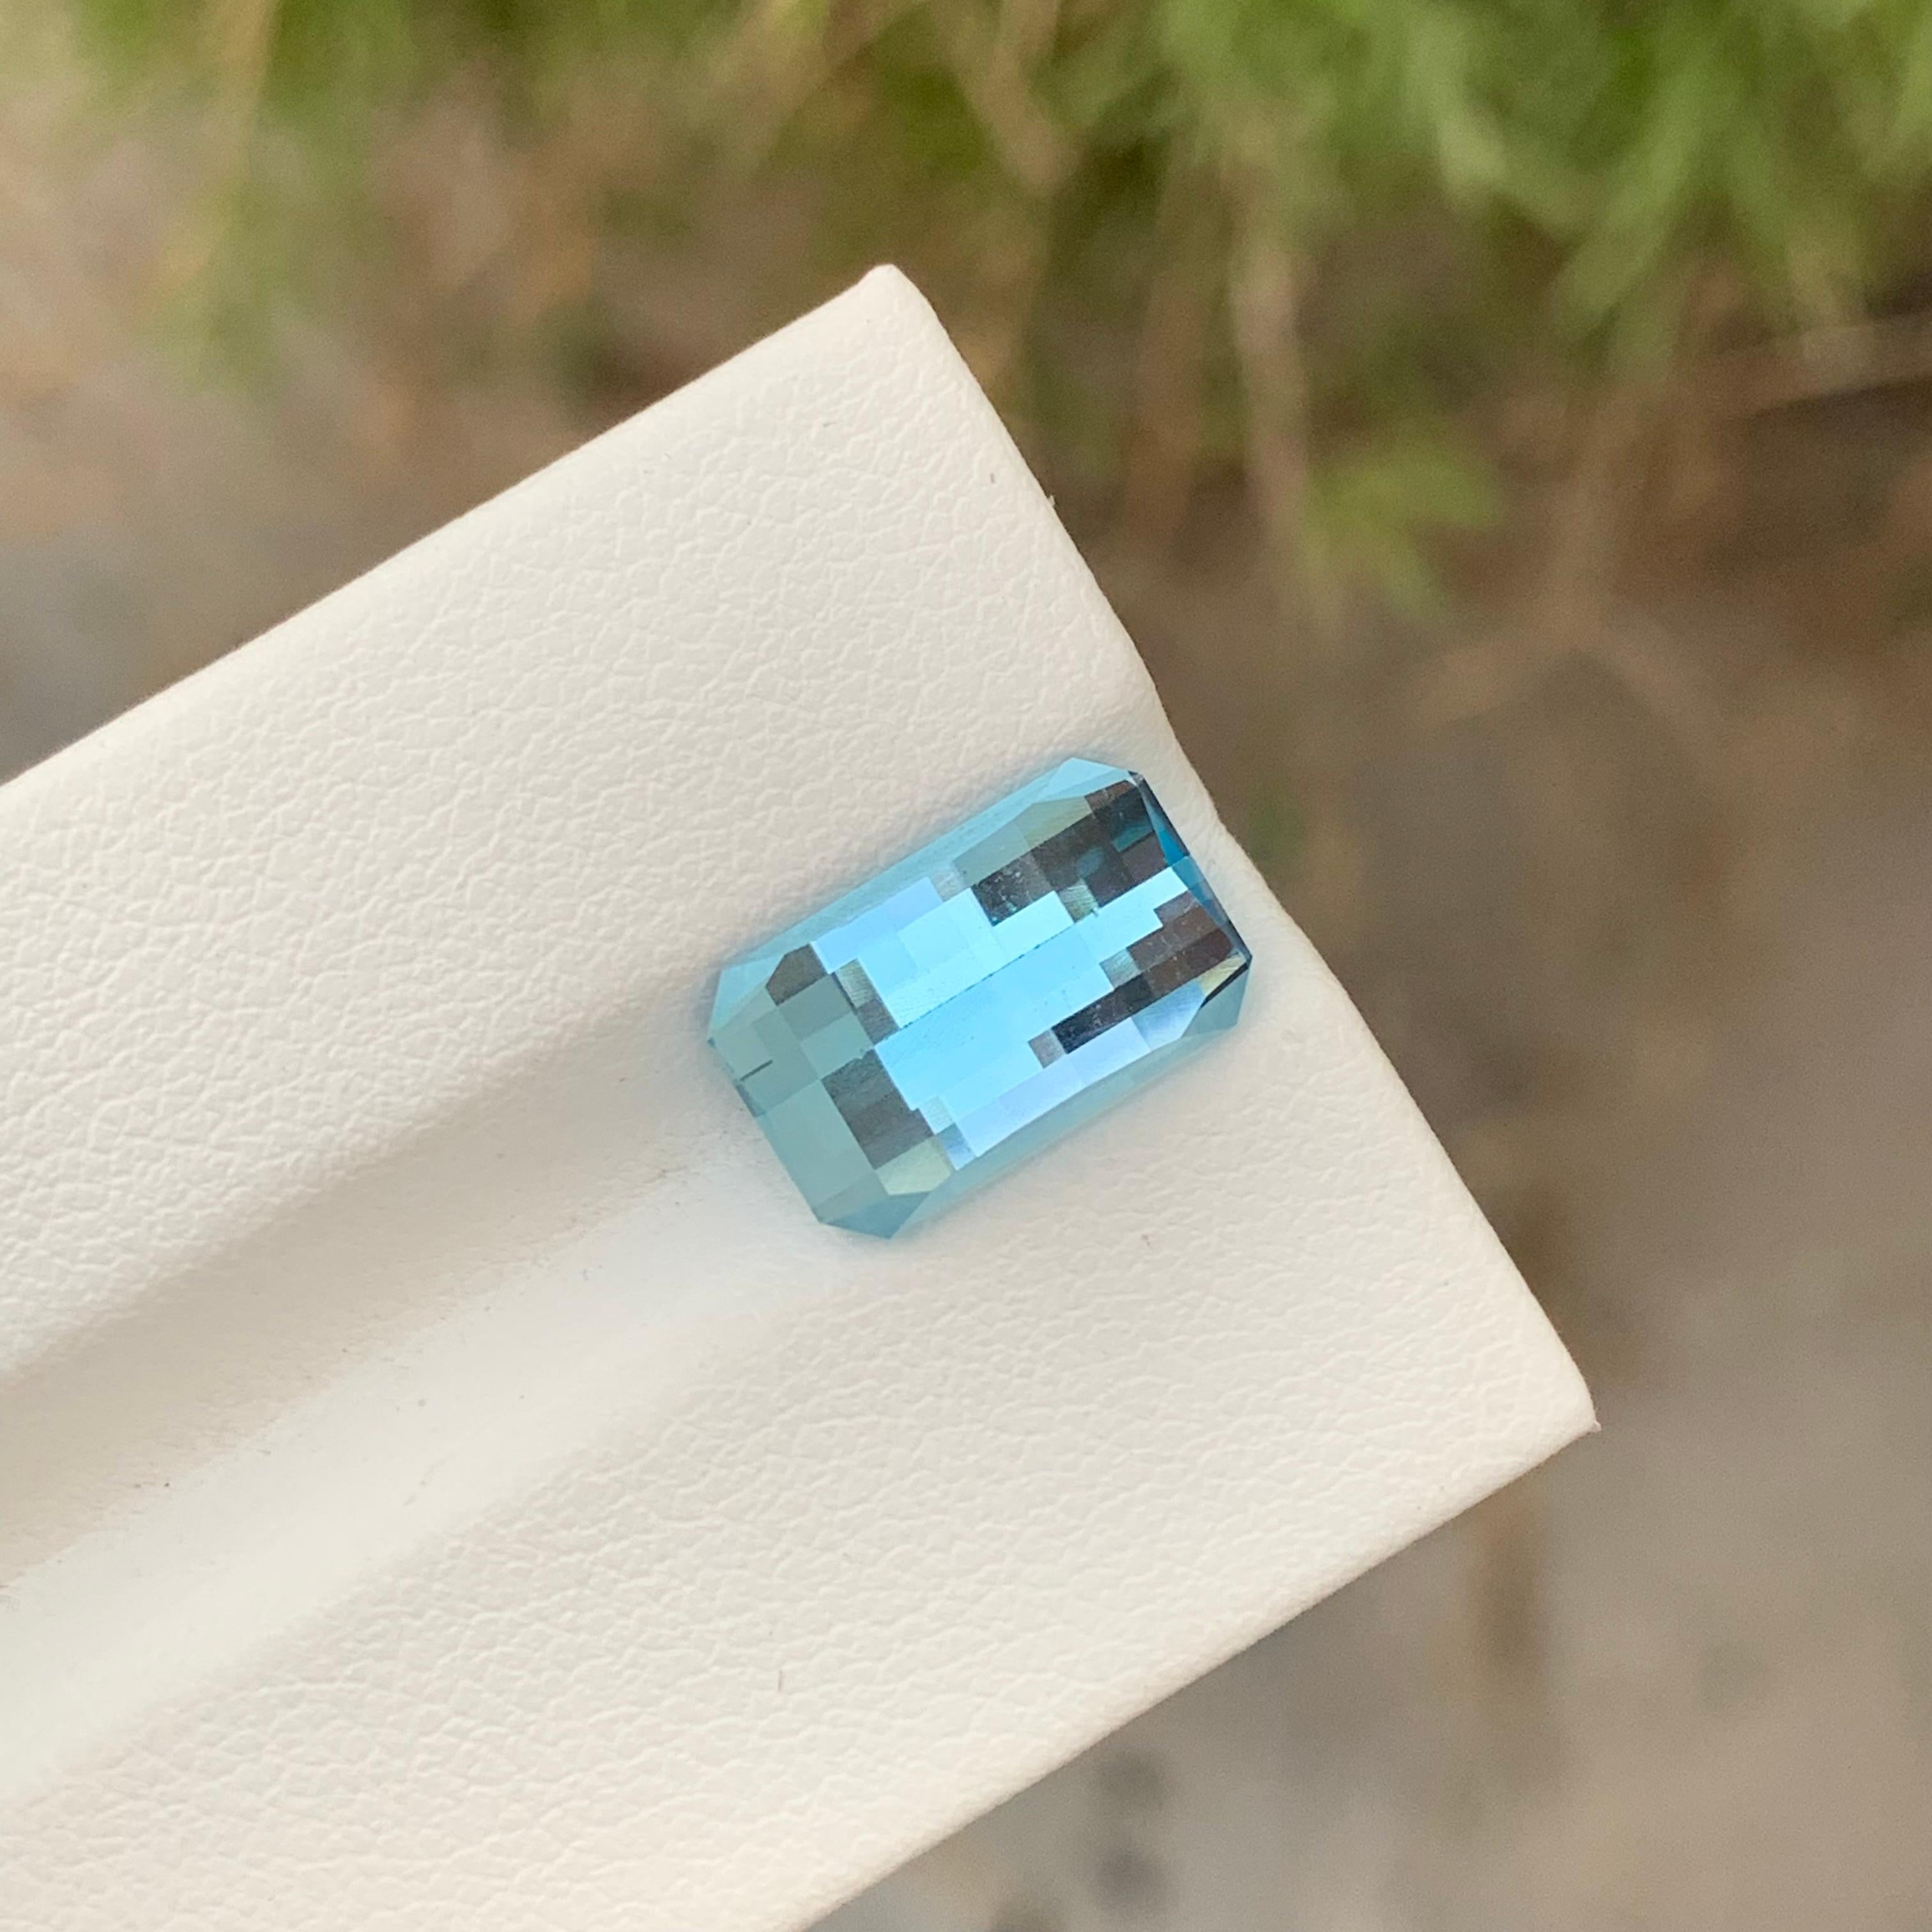 Stunning 6.15 Carats Pixelated Cut Loose Sky Blue Topaz Earth Mine Ring Gem For Sale 3